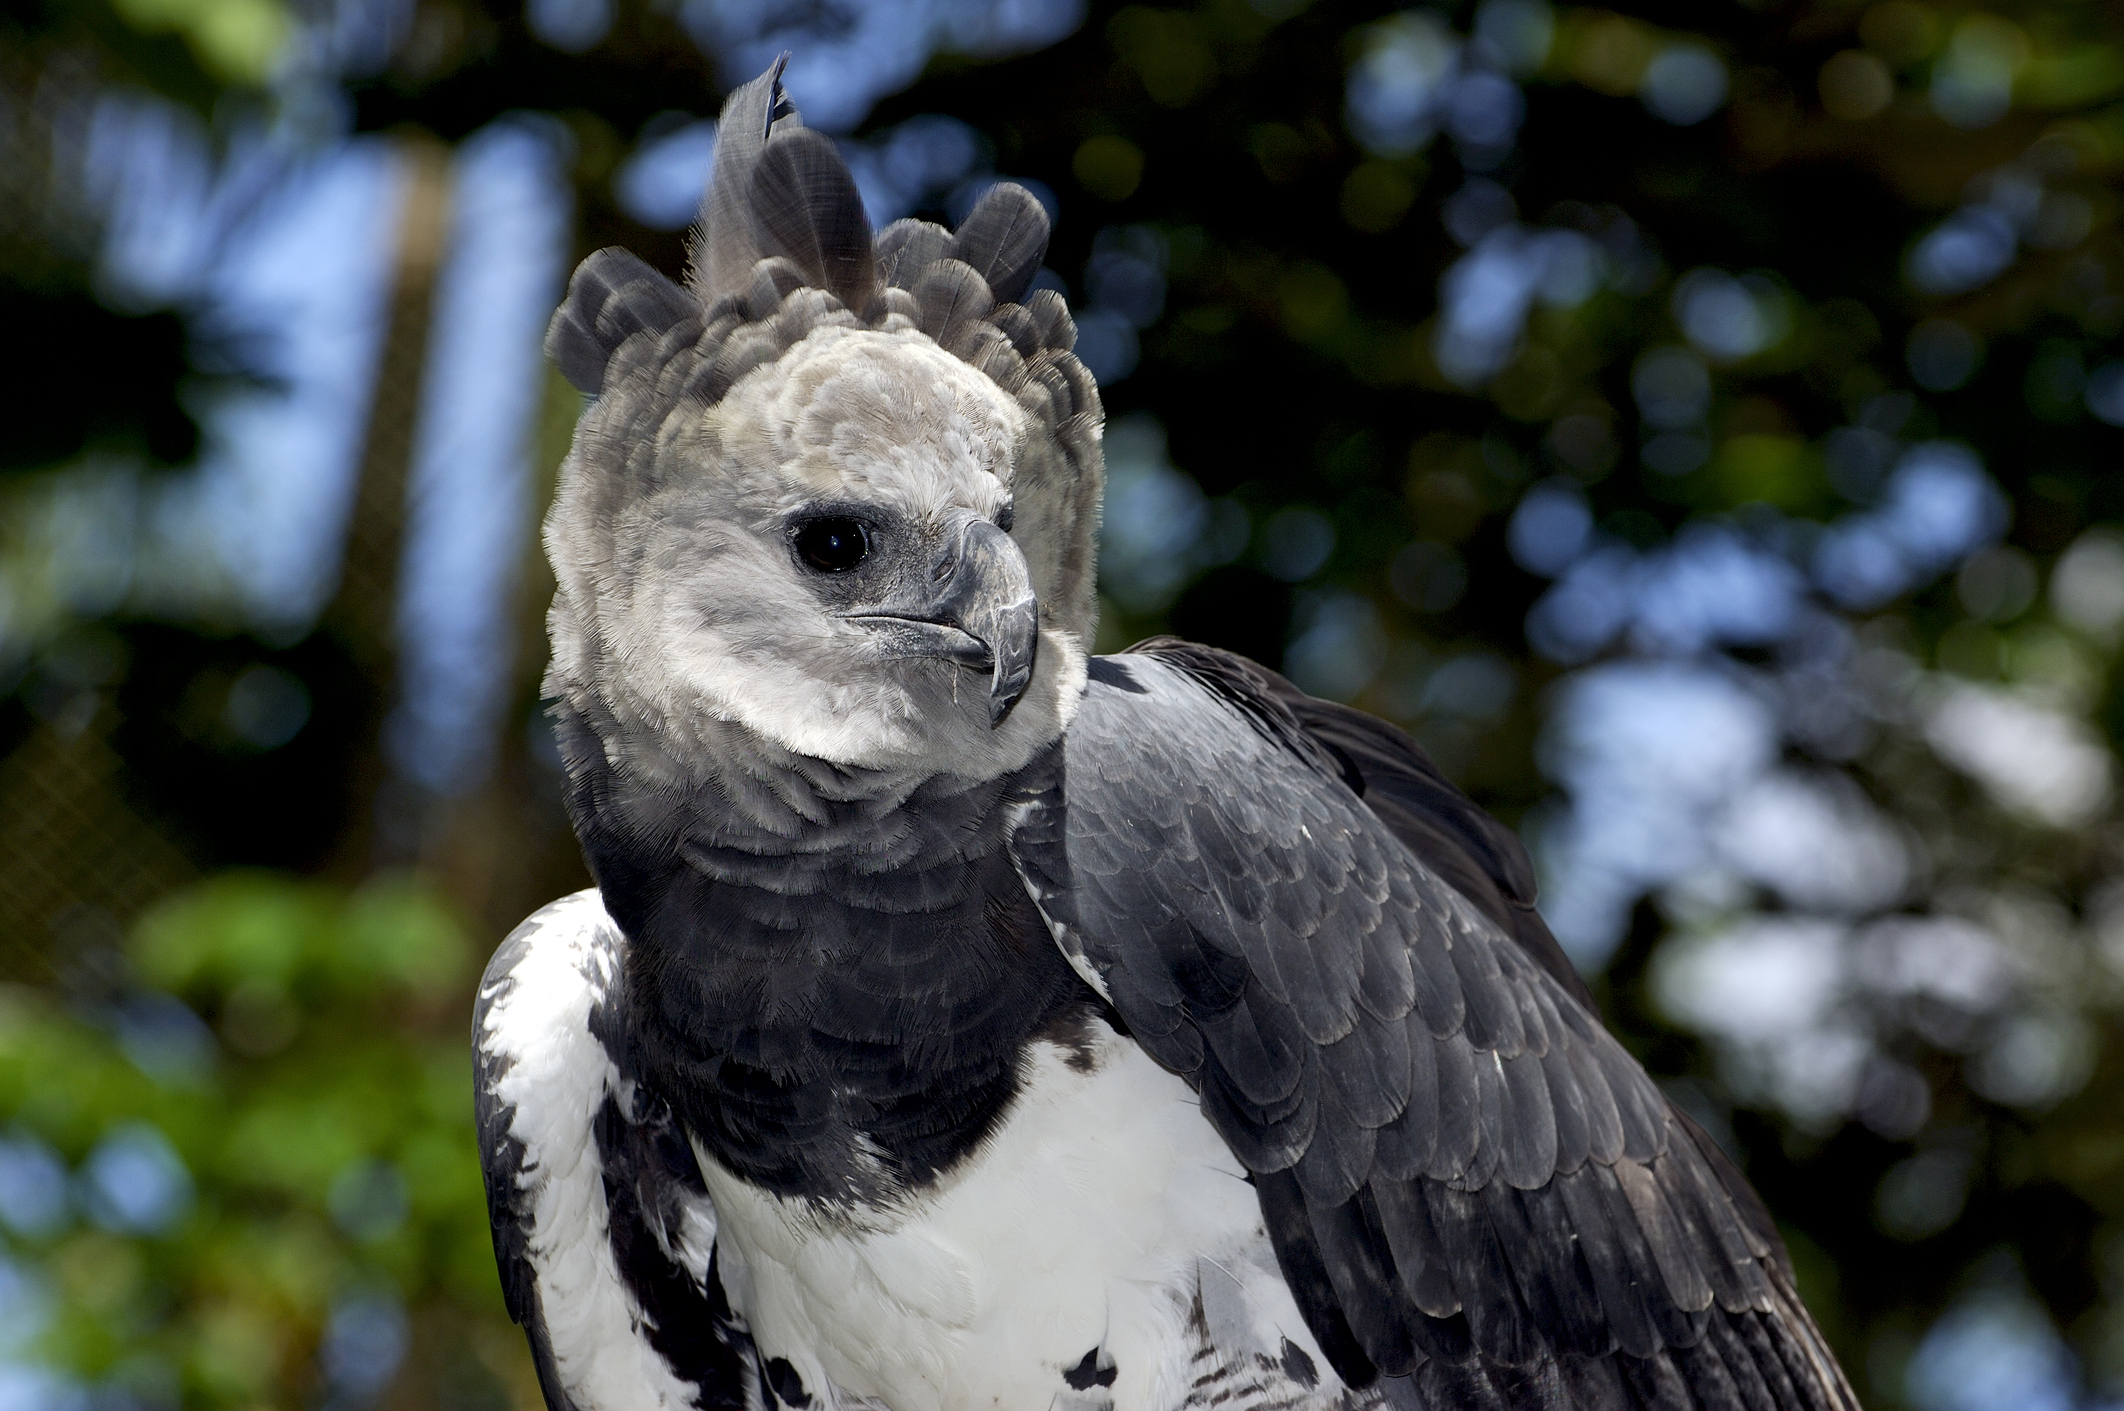 All hail the majestic Harpy eagle! This fine bird is not only the largest # eagle in the Americas, but its size and strength place it among…